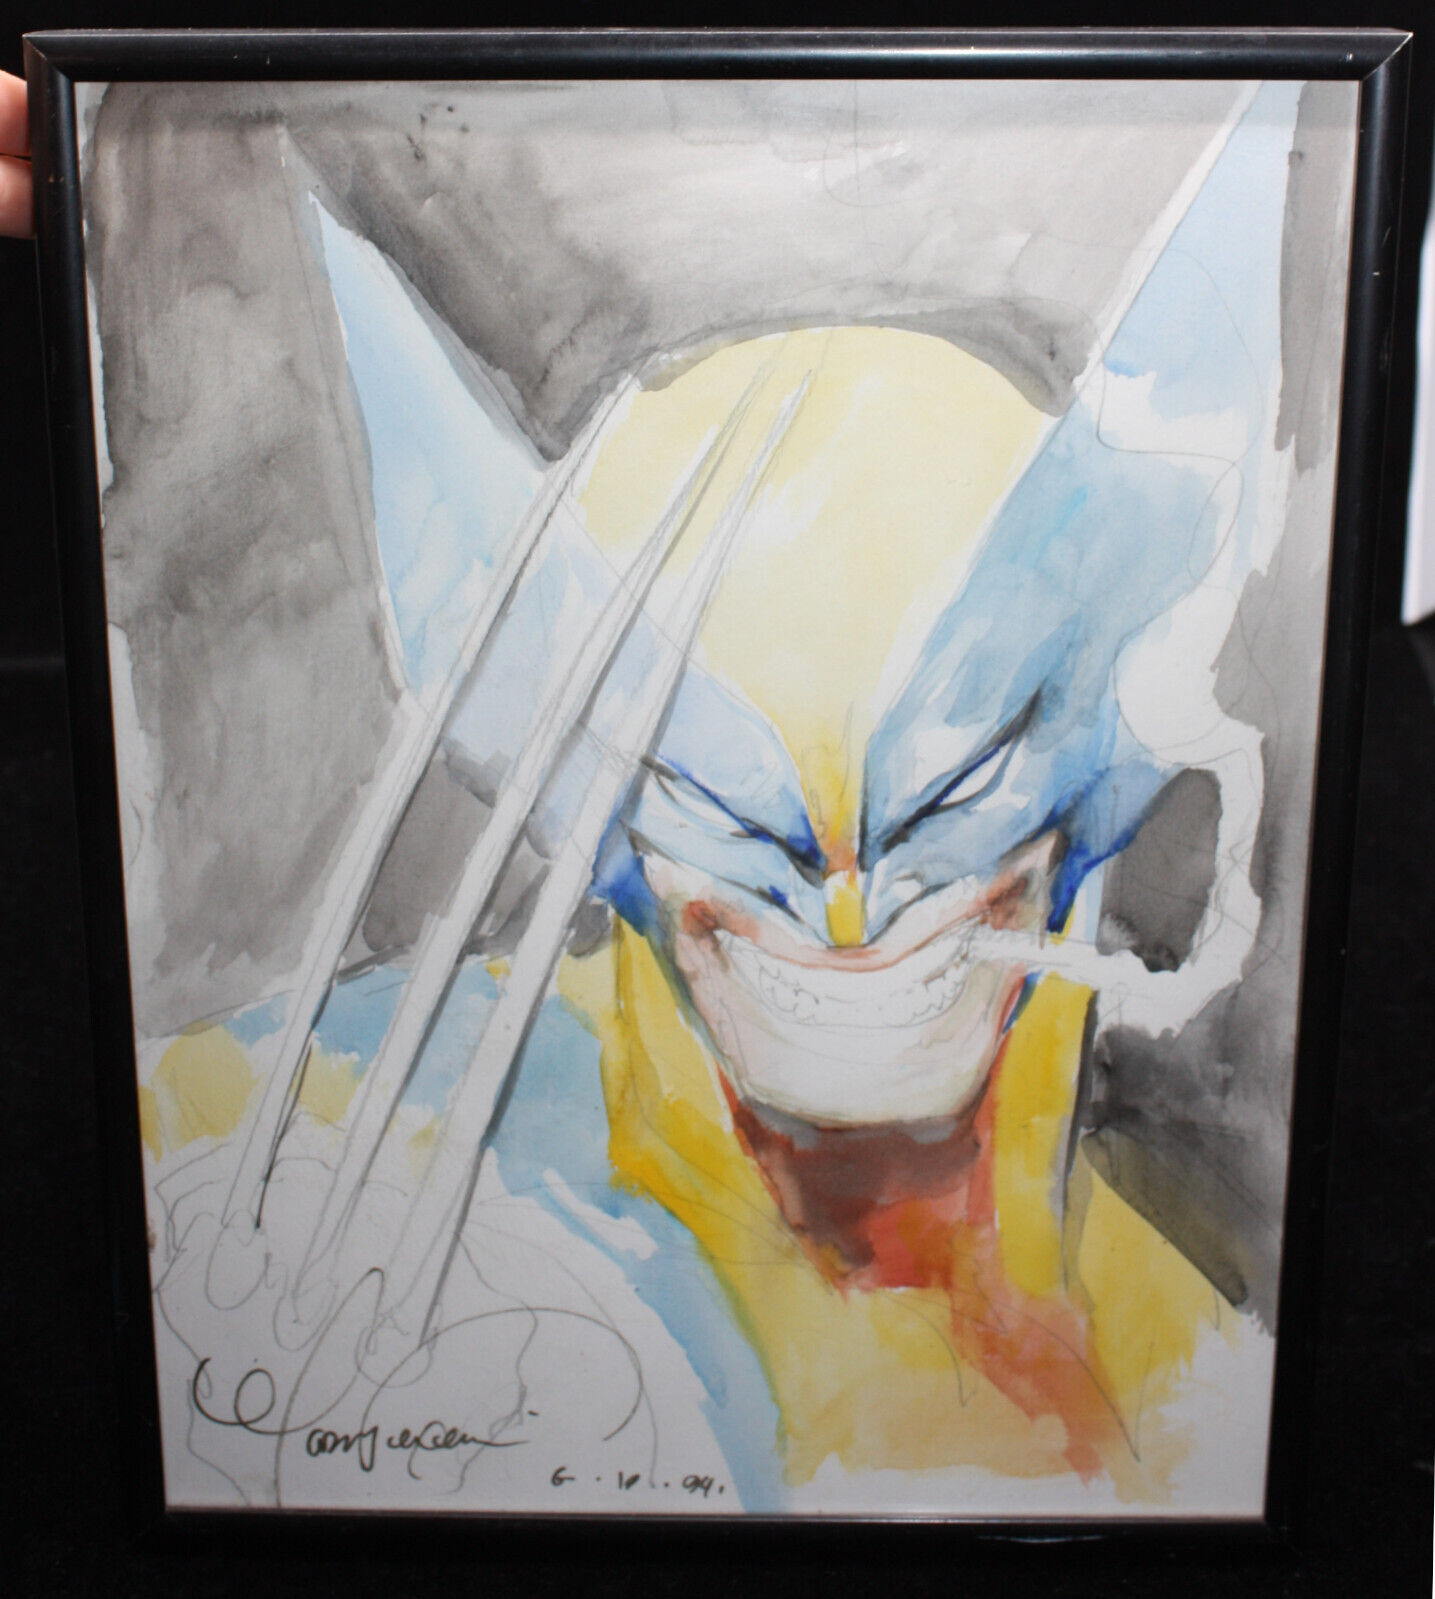 Wolverine Watercolor & Pencil Framed Art by Mark Texeira - Signed - 1994